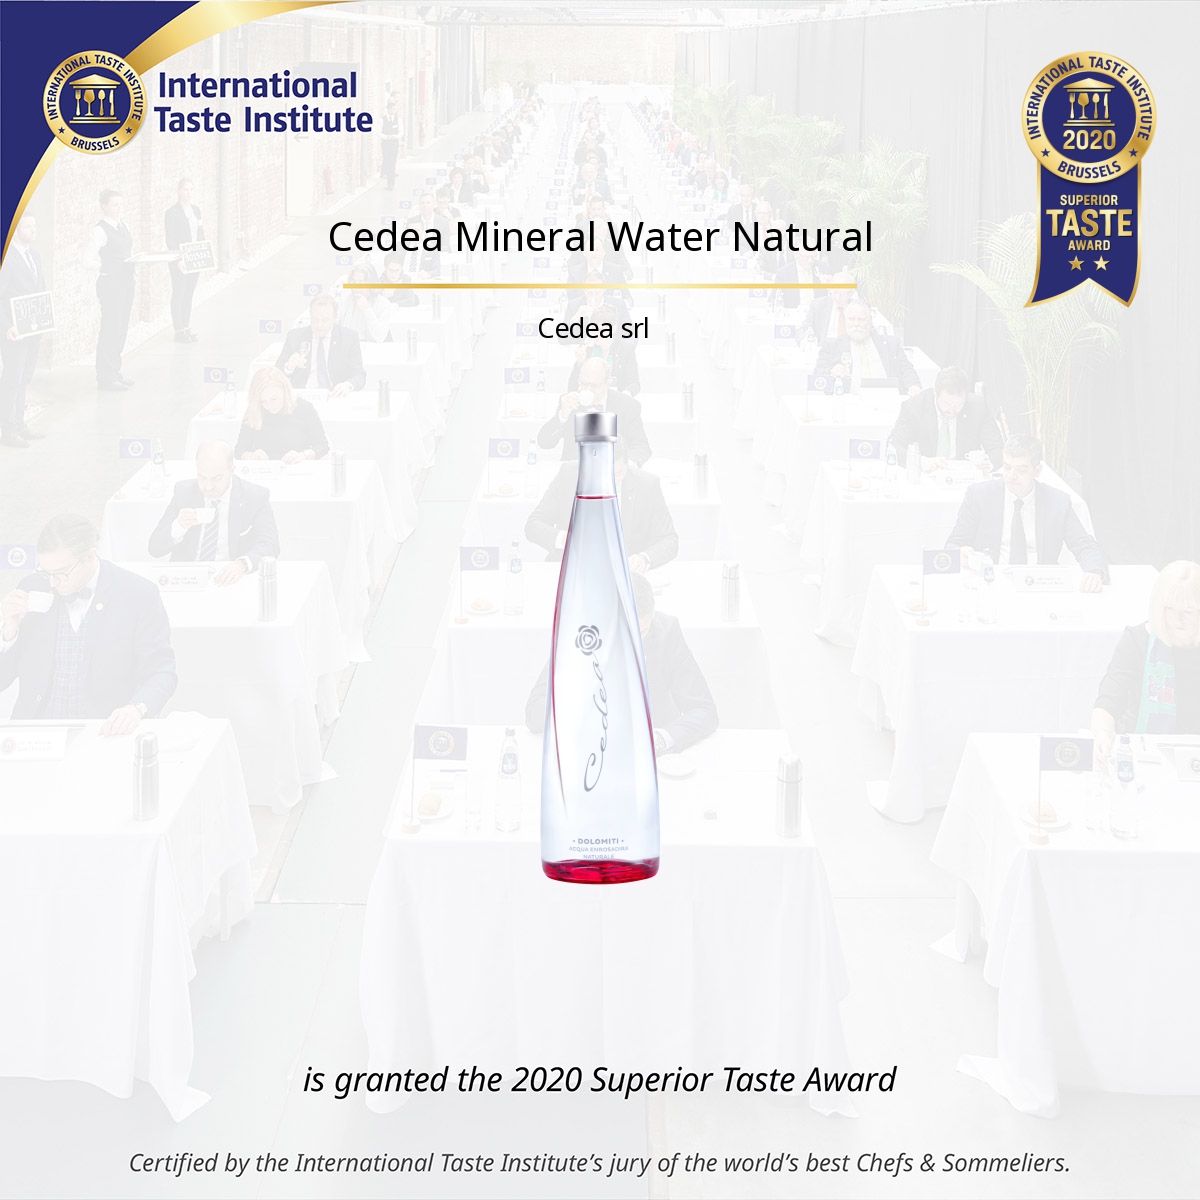 Square image of Cedea Mineral Water Natural